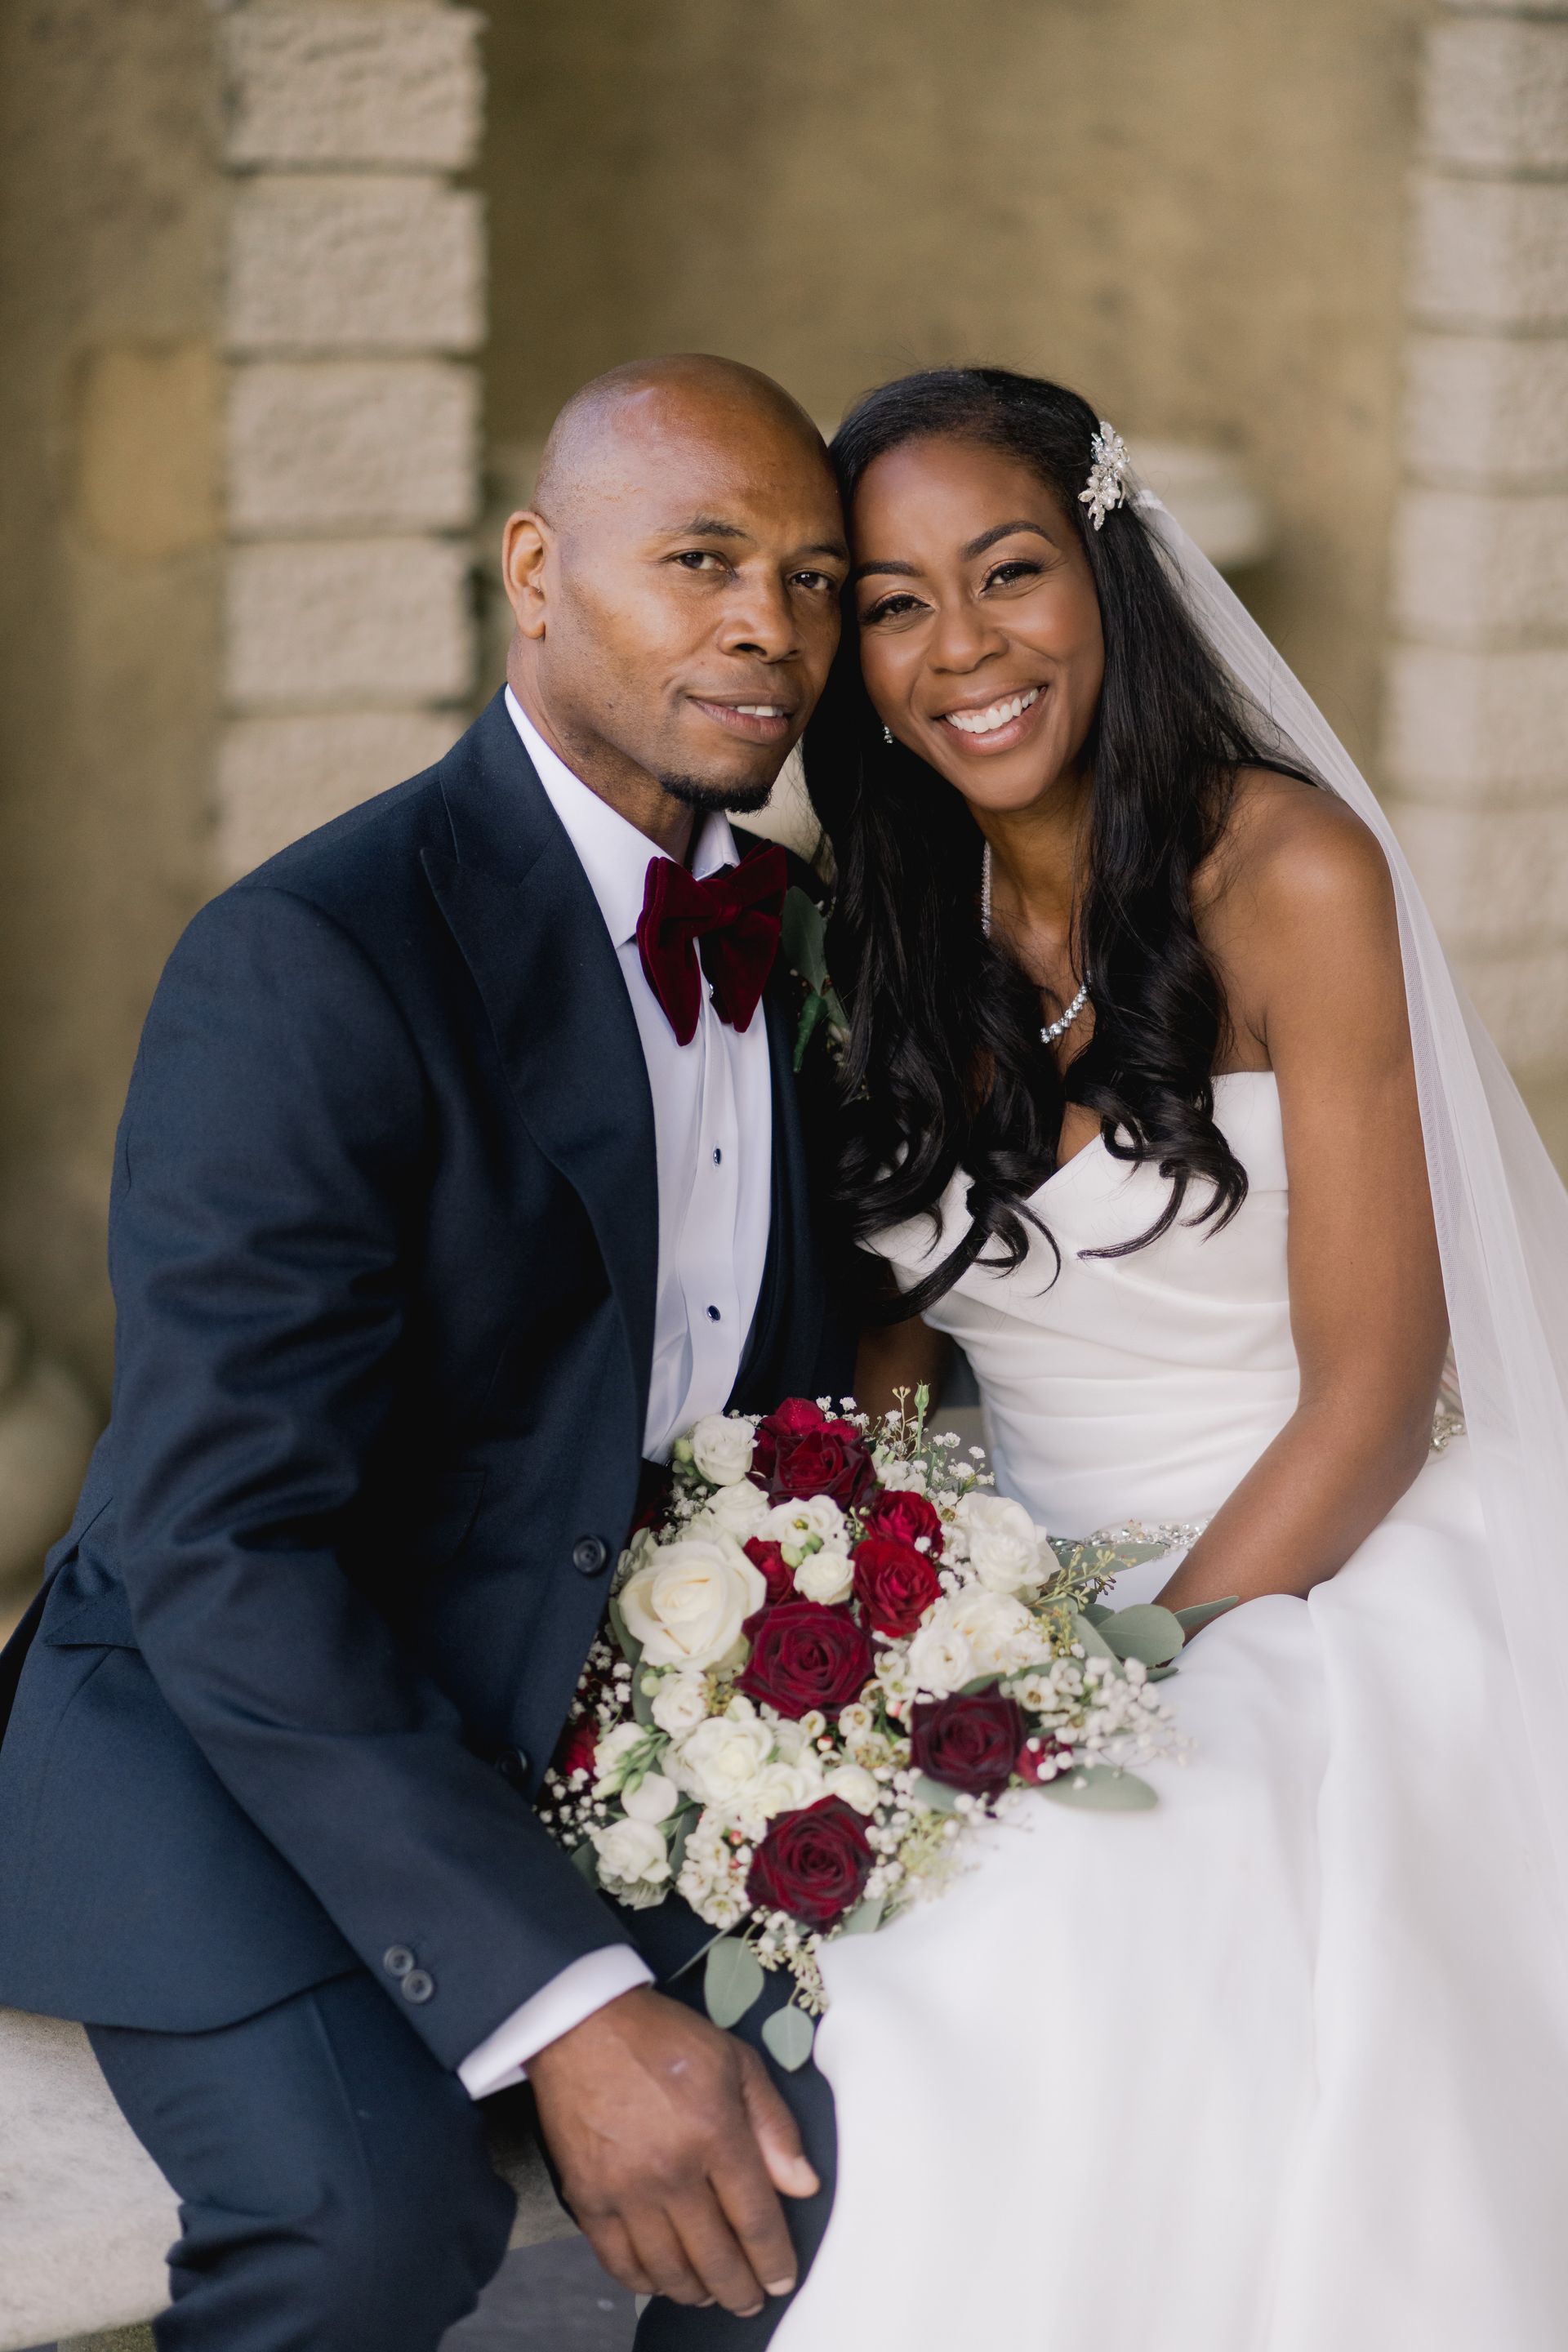 Black bride and groom smiling at the camera with the bride holding white and red floral bouquet